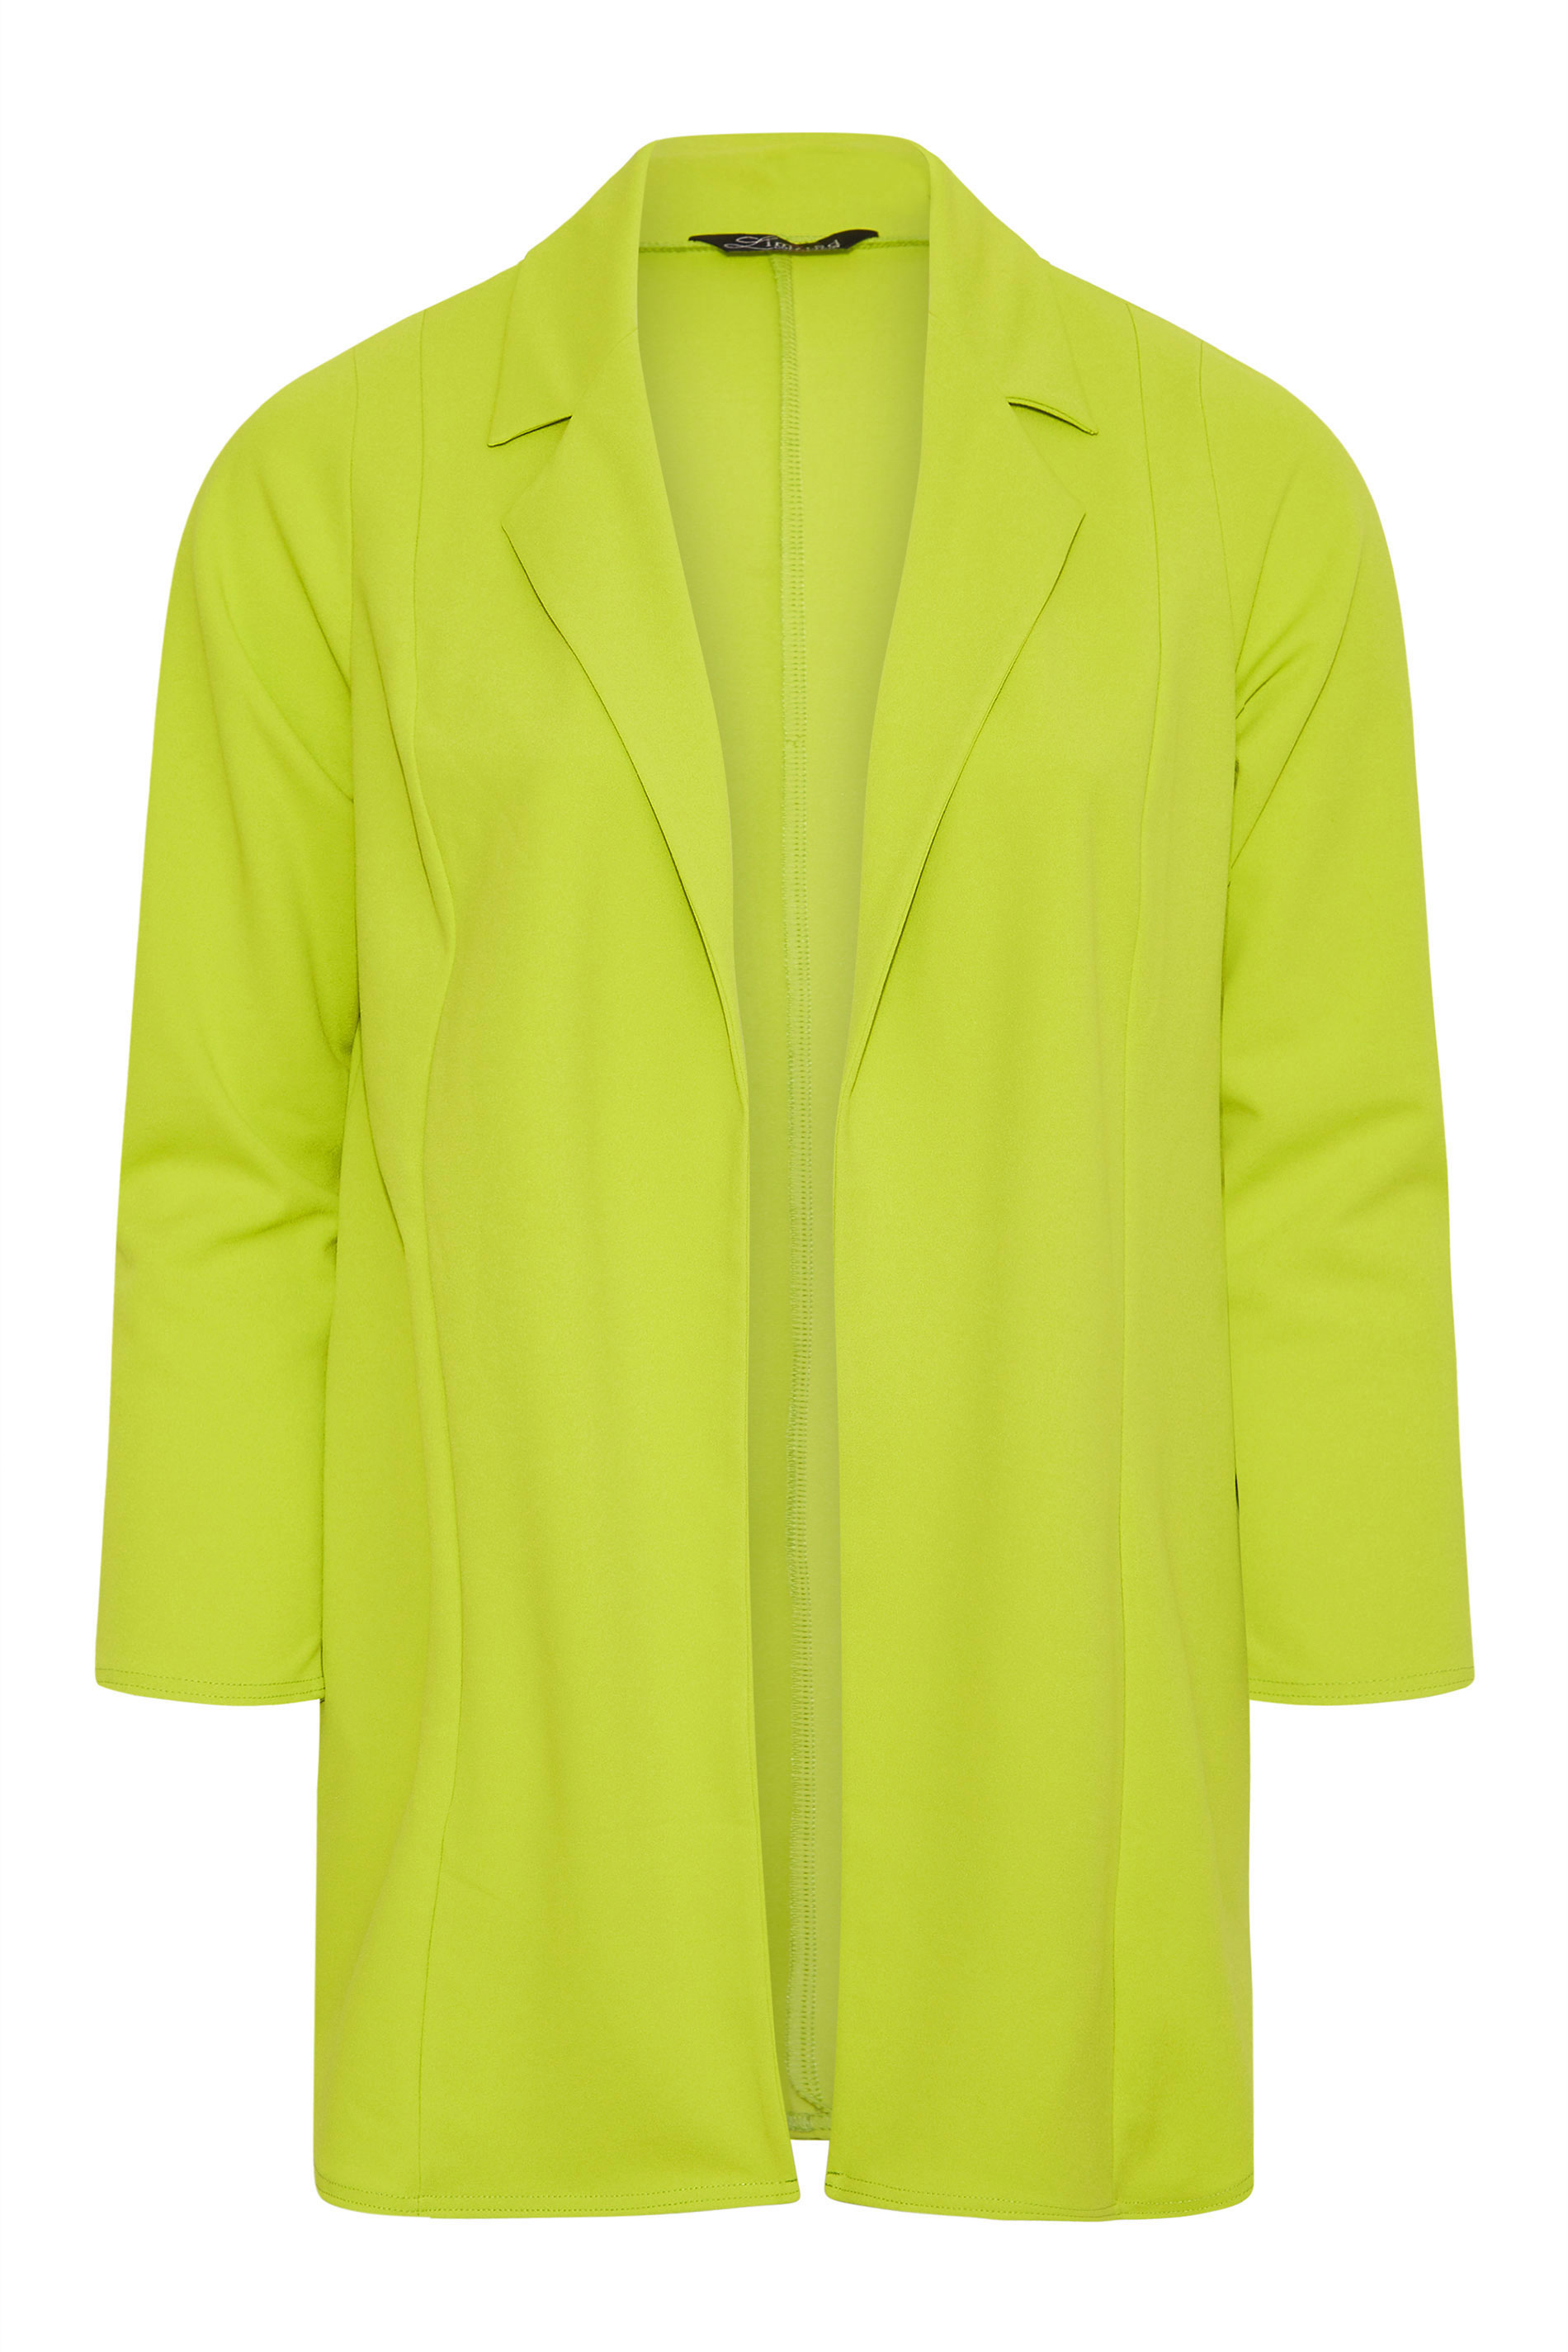 LIMITED COLLECTION Blazer verde limón scuba | Yours Clothing